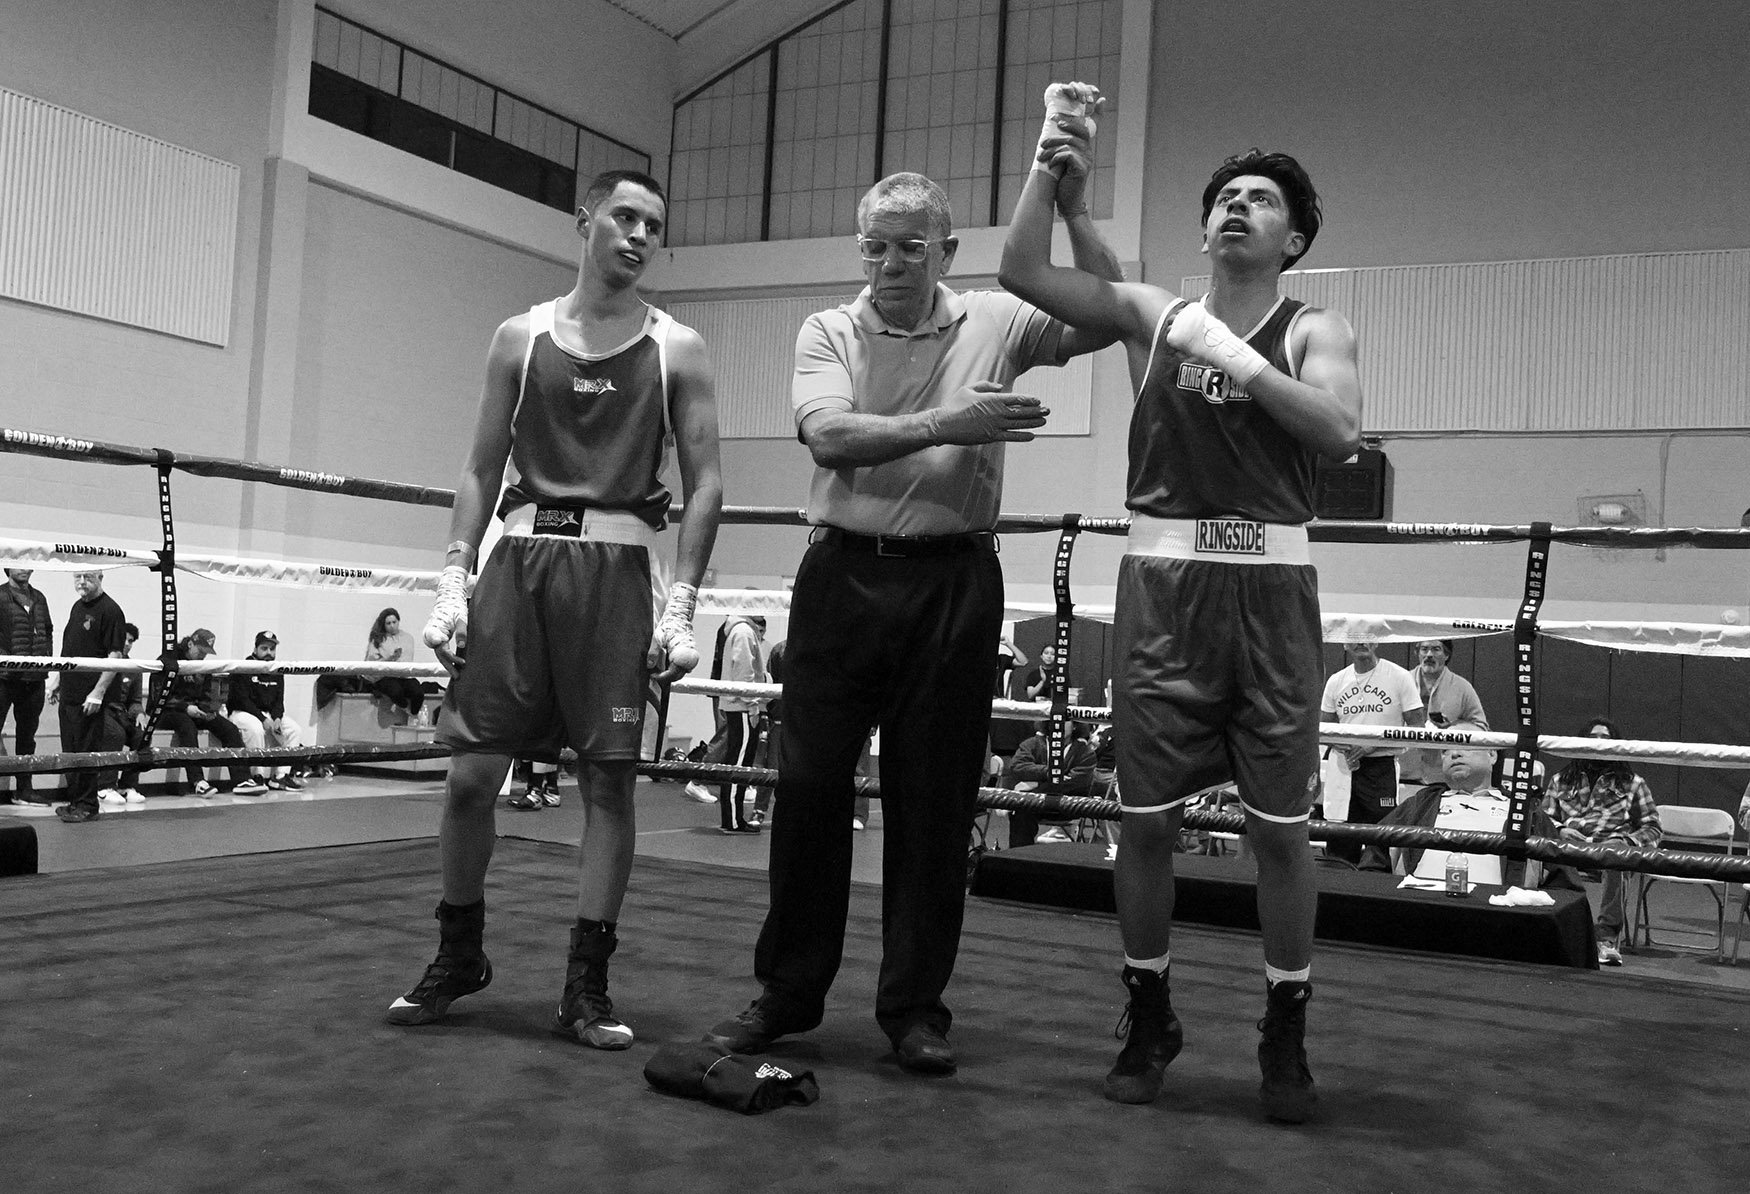  Boxer Roger Gomez-Peralta, right, of the Villa Parke Boxing of Pasadena reacts as he defeated Javier Aguilar of the Azusa Boxing Club during the Golden Gloves competition at Loma Alta Park in Altadena on Thursday, February 23, 2023.  